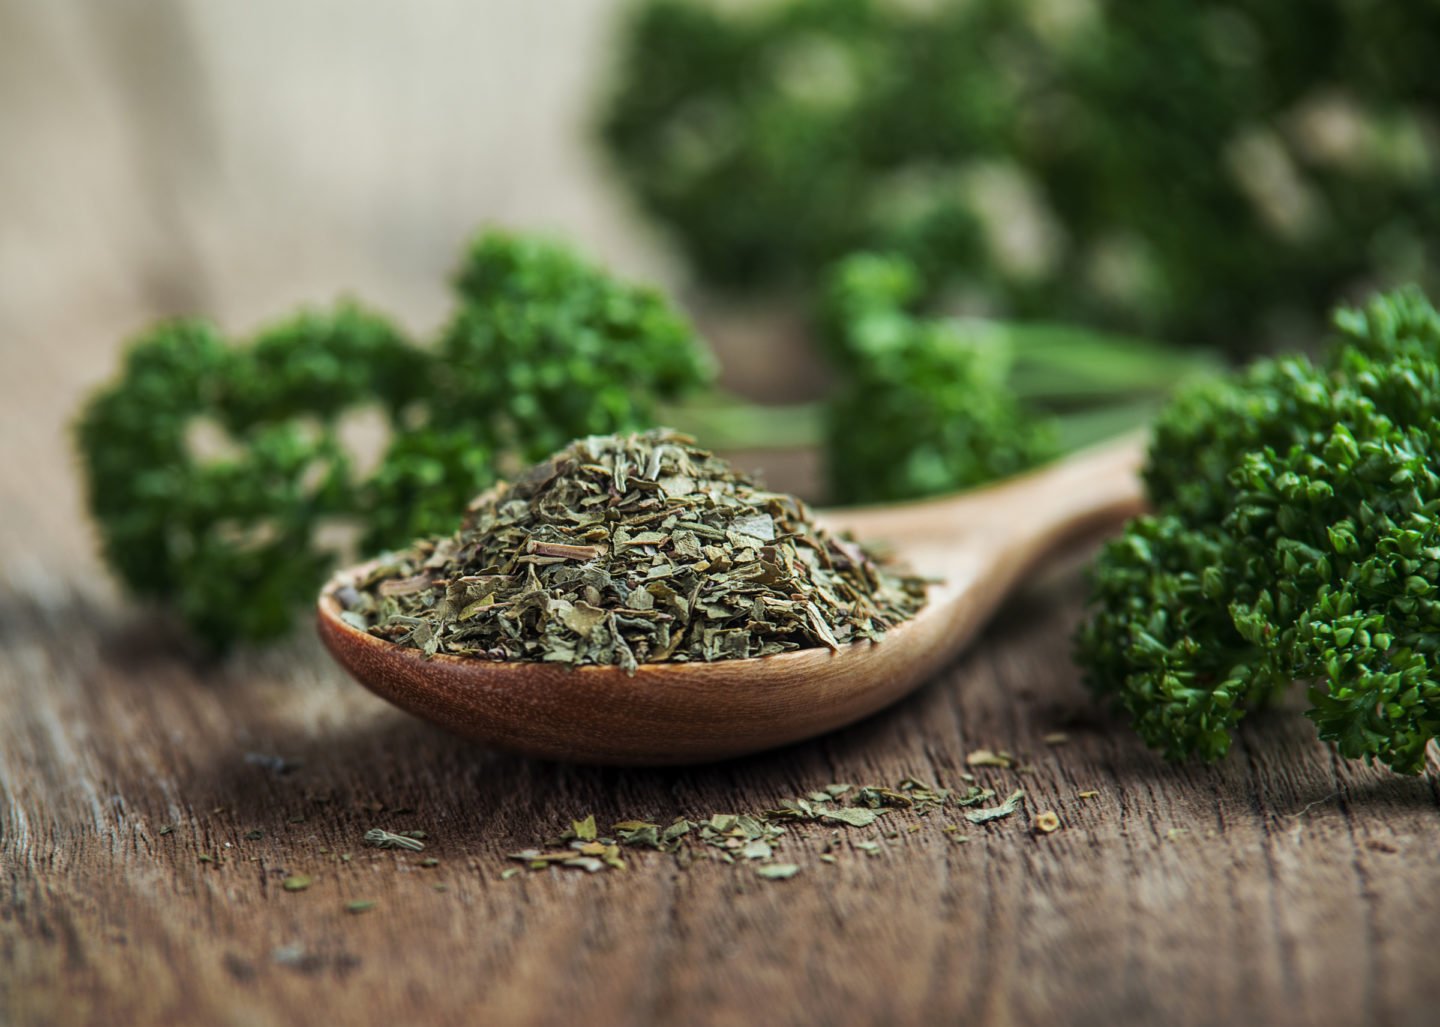 parsley is one of the best thyme substitutes